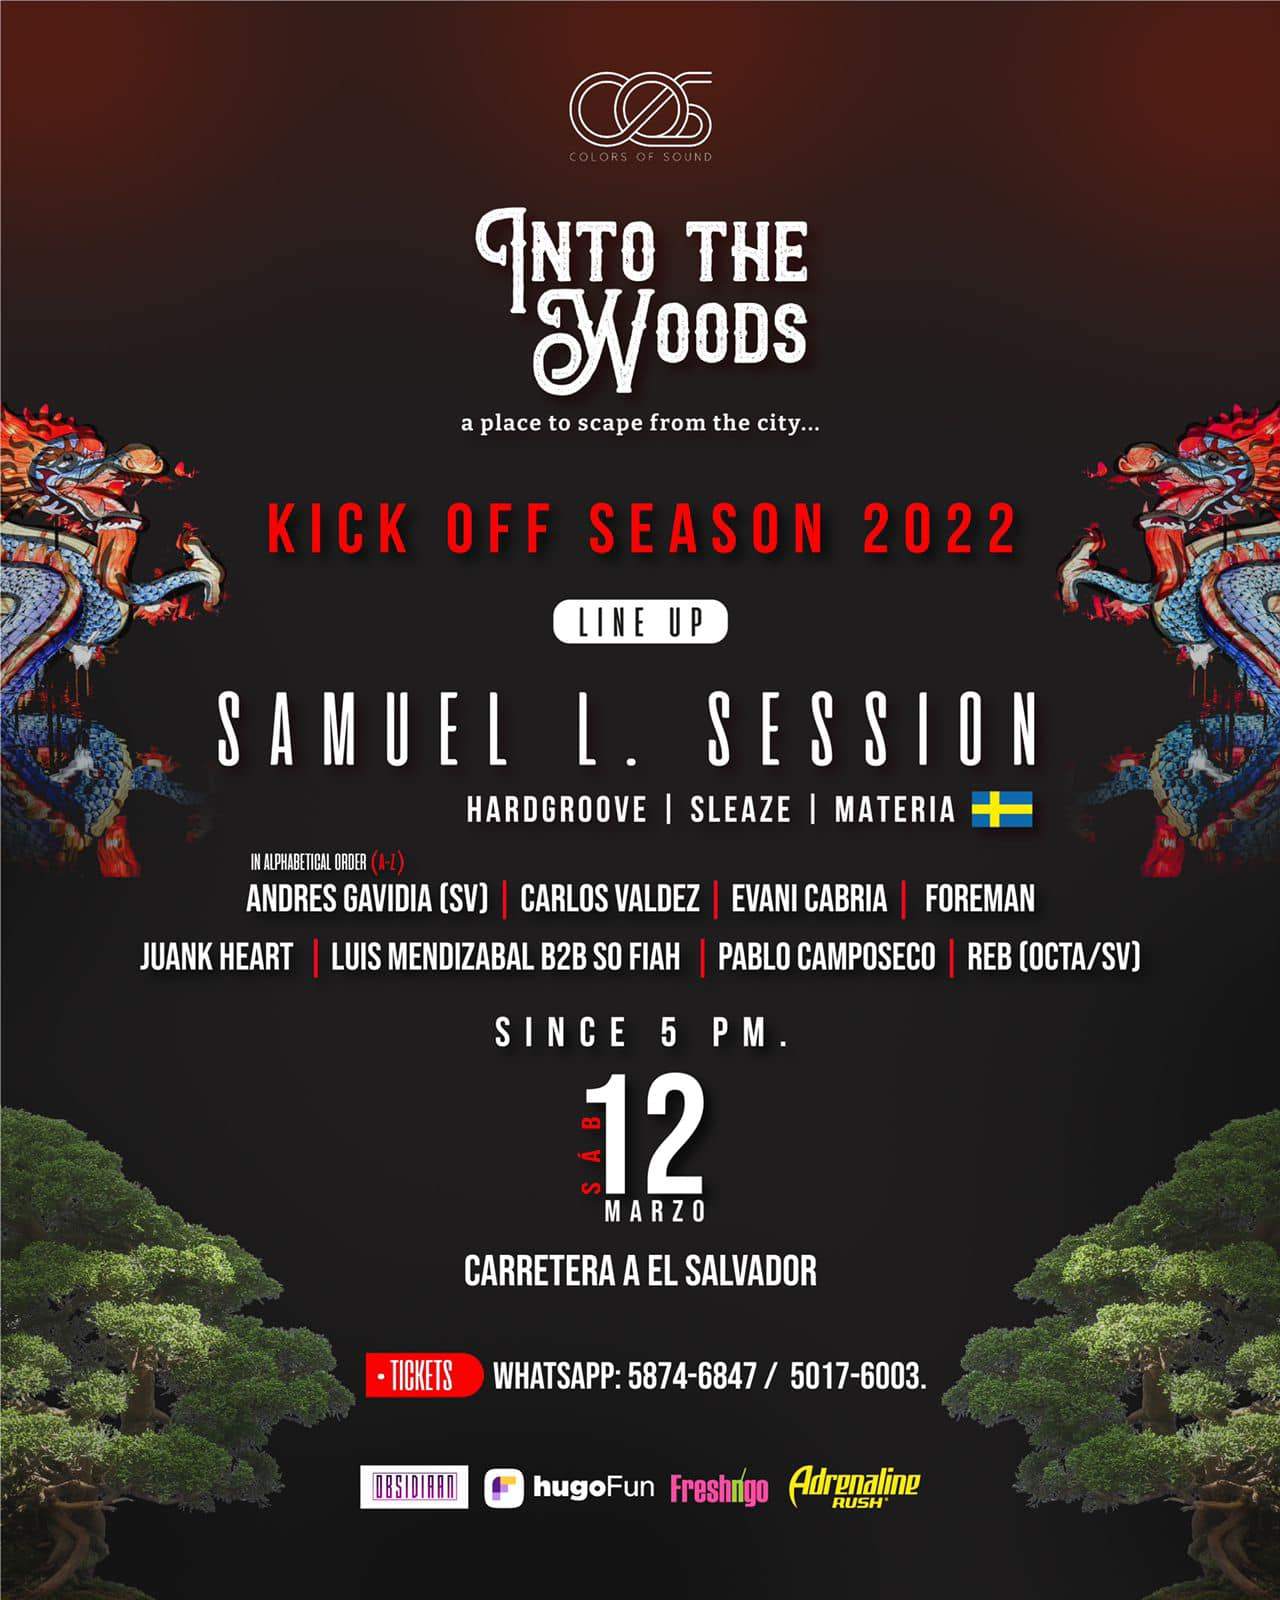 INTO THE WOODS: Kick off Season with Samuel L. Session - Página frontal